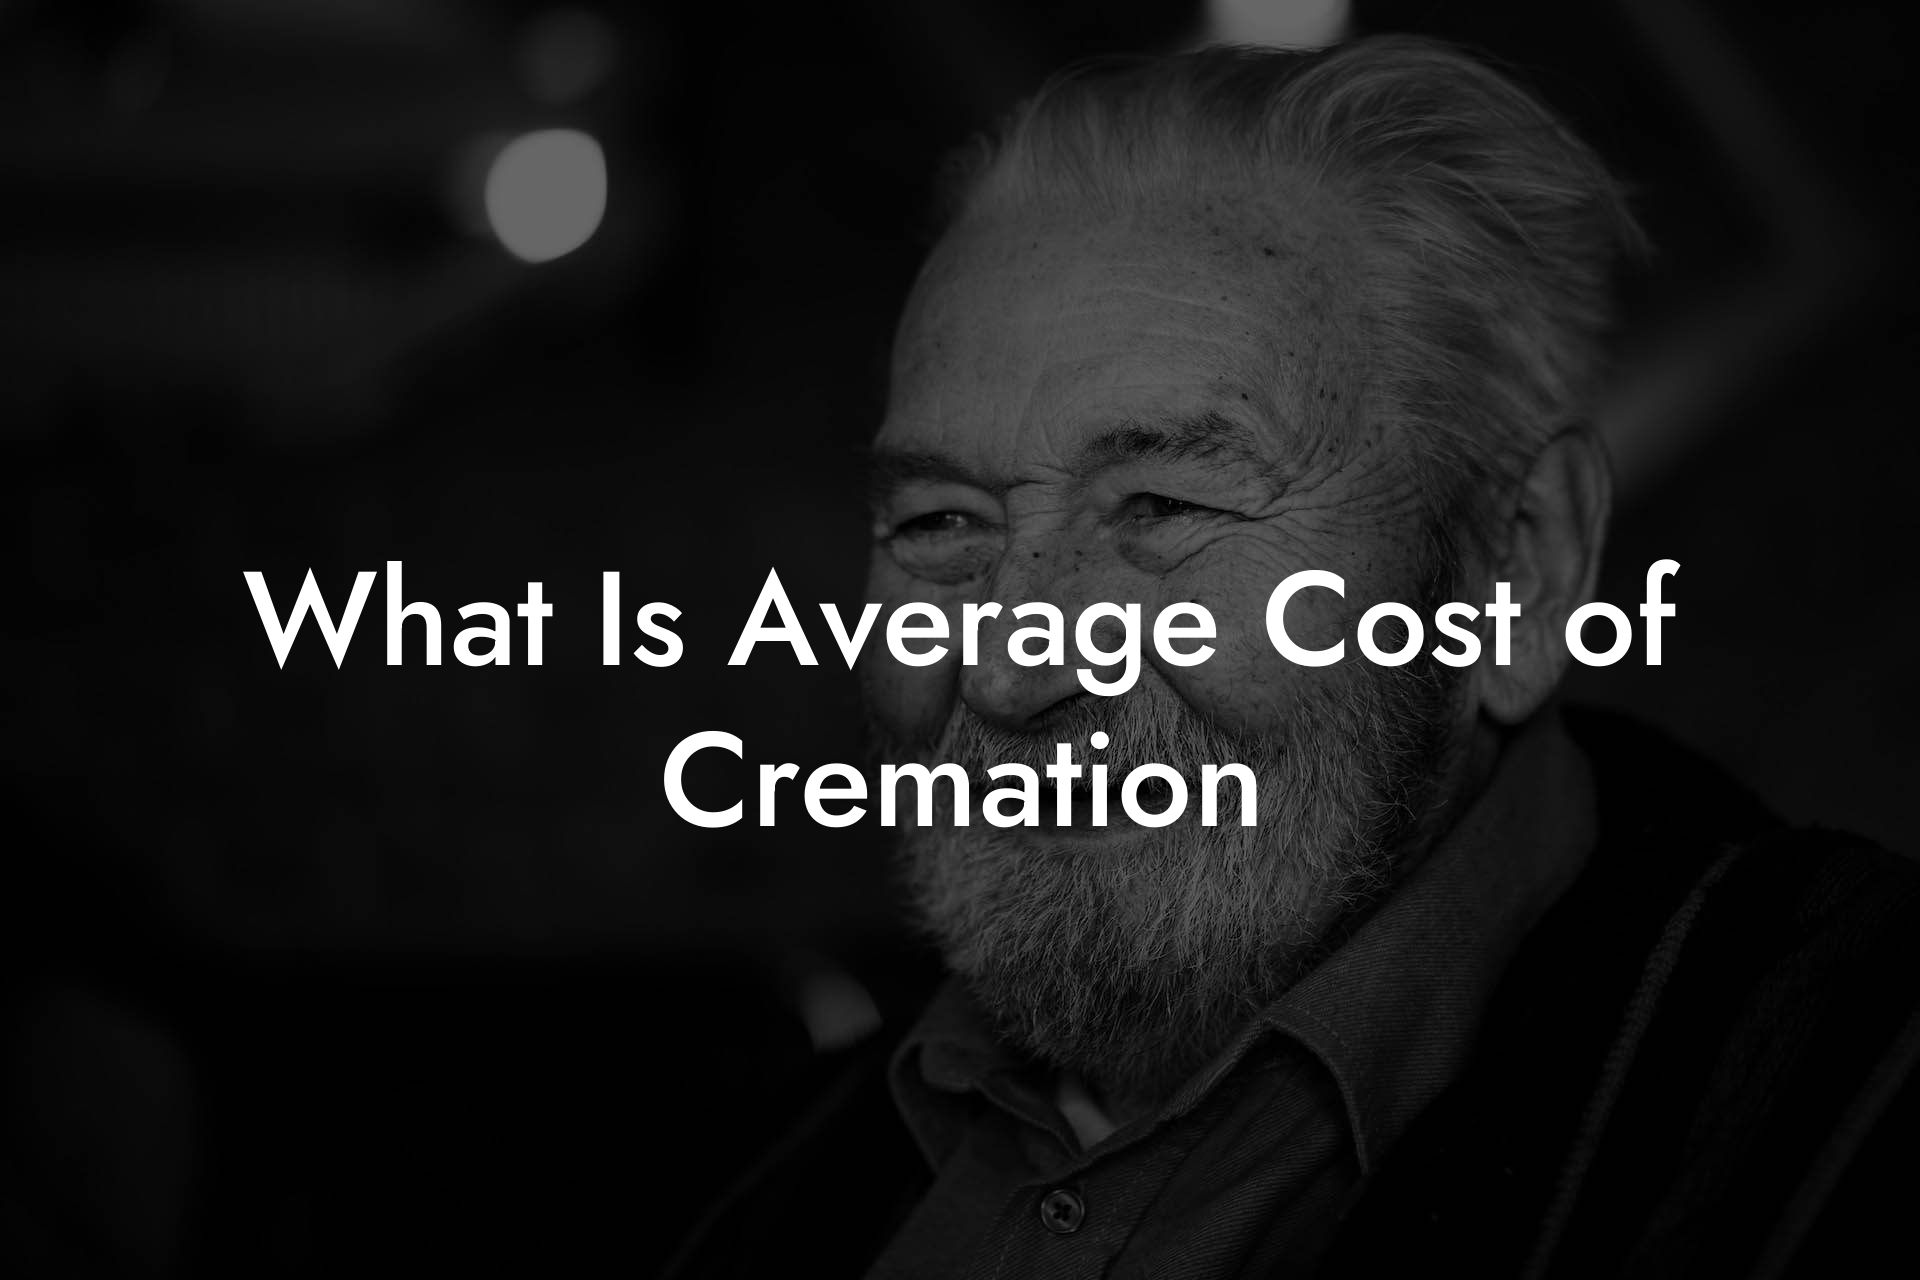 What Is Average Cost of Cremation